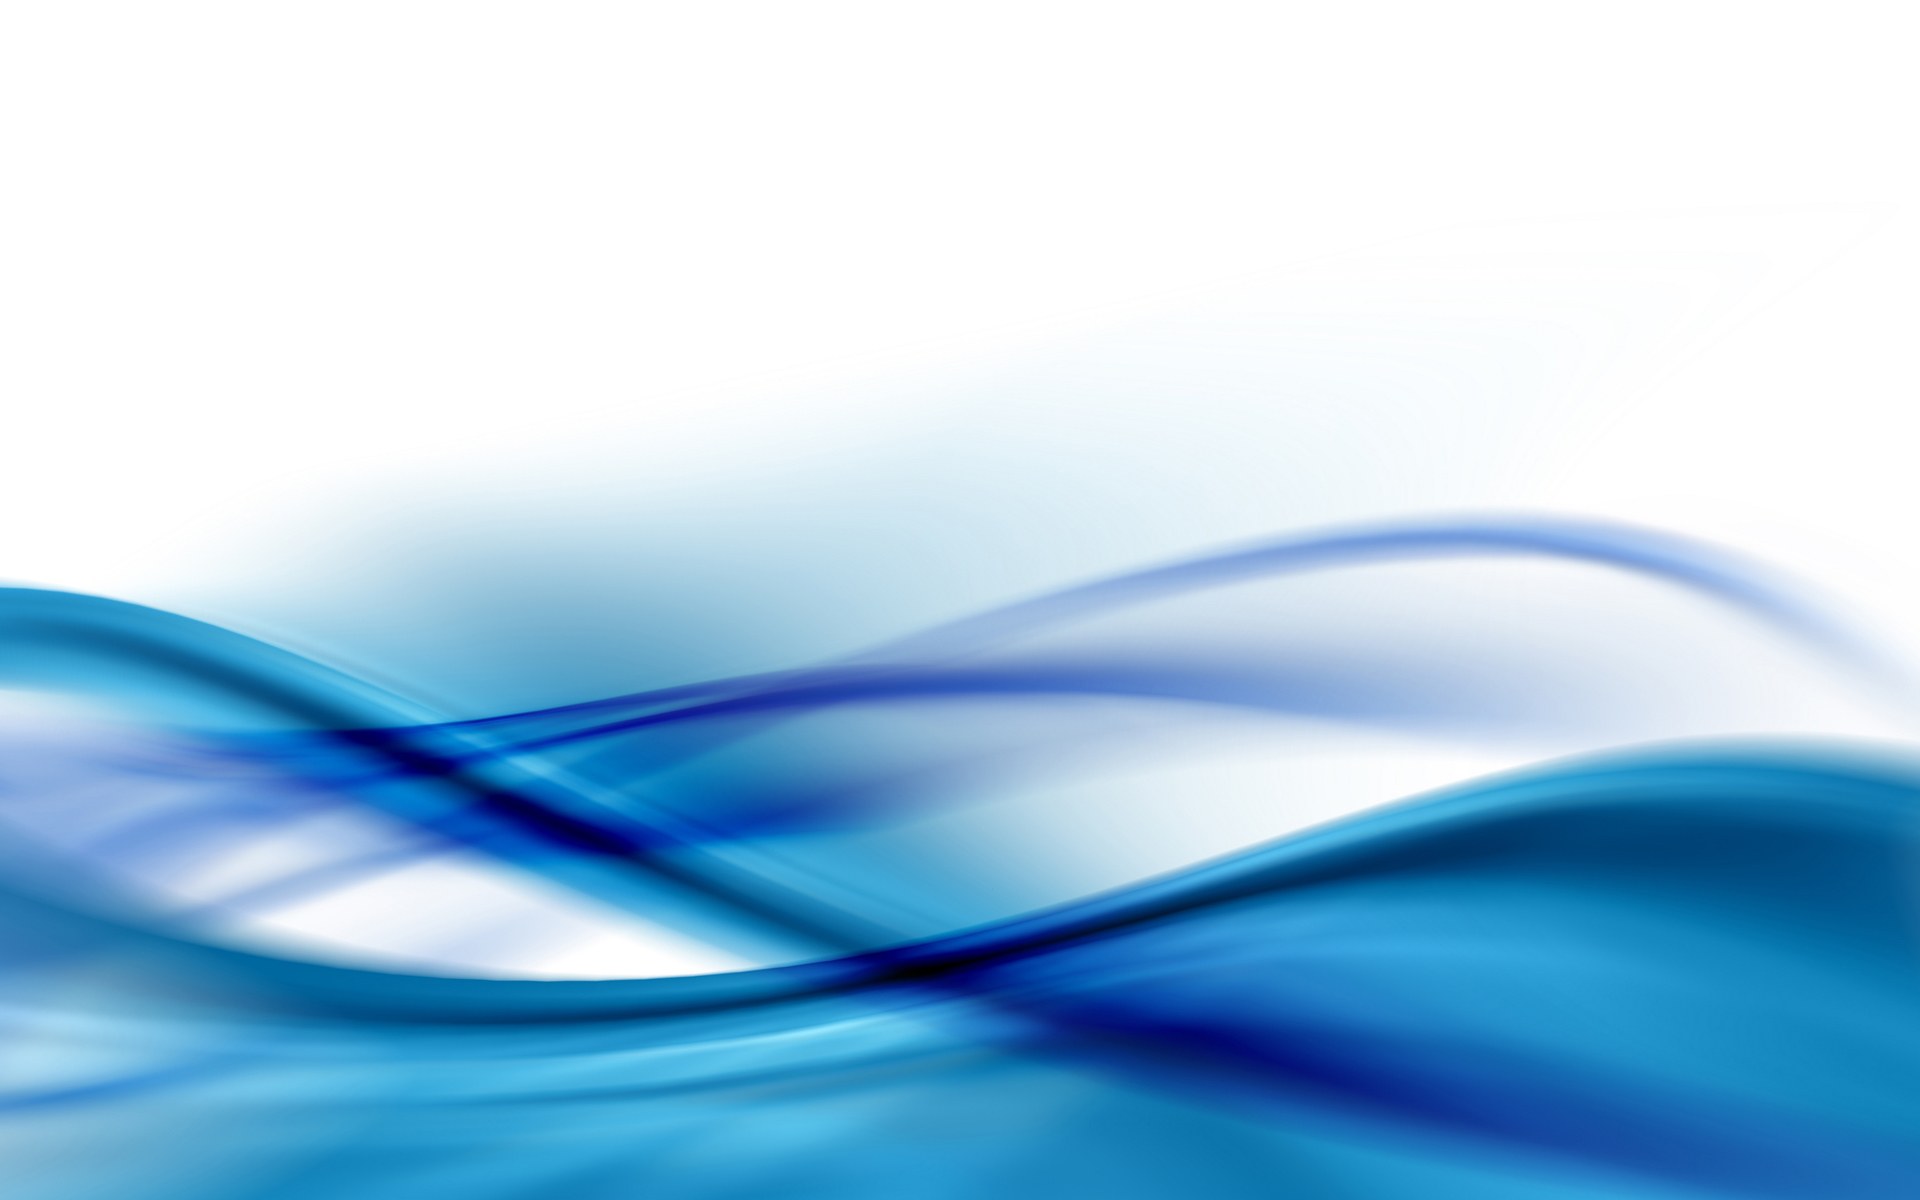 Abstract Blue 2164 Hd Wallpapers in Abstract   Imagescicom